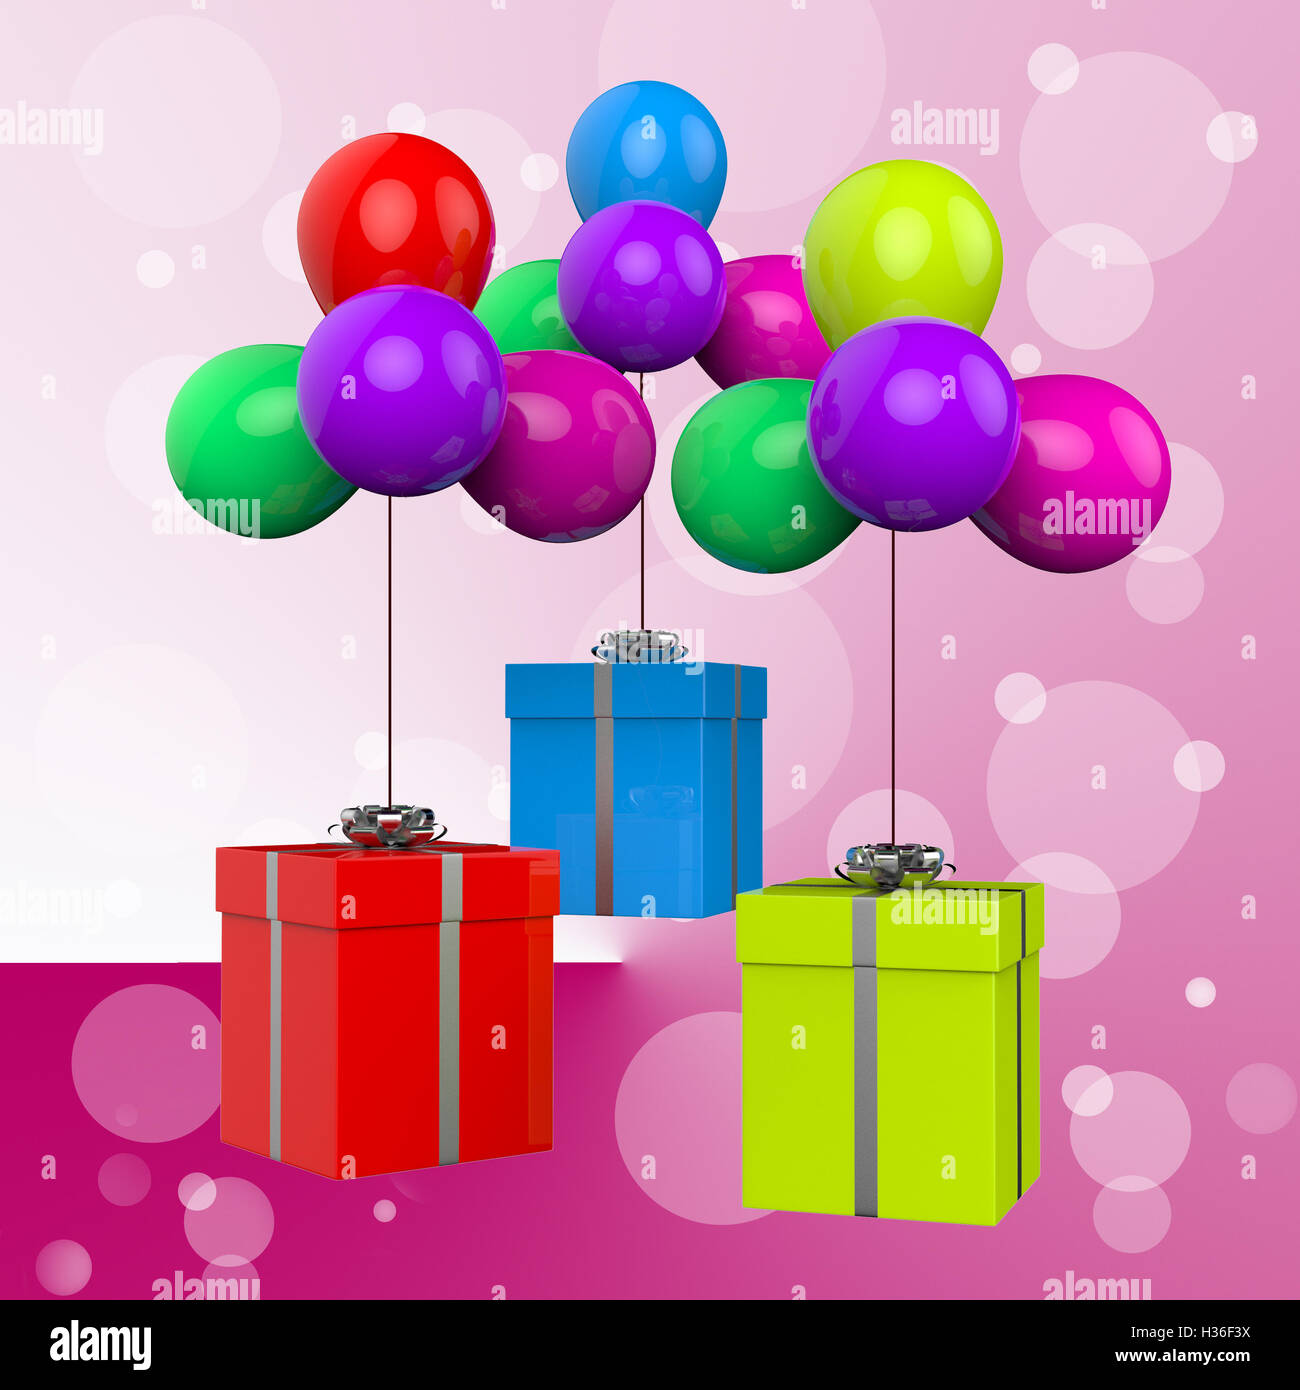 Balloons With Presents Show Colourful Balloons And Presents Stock Photo